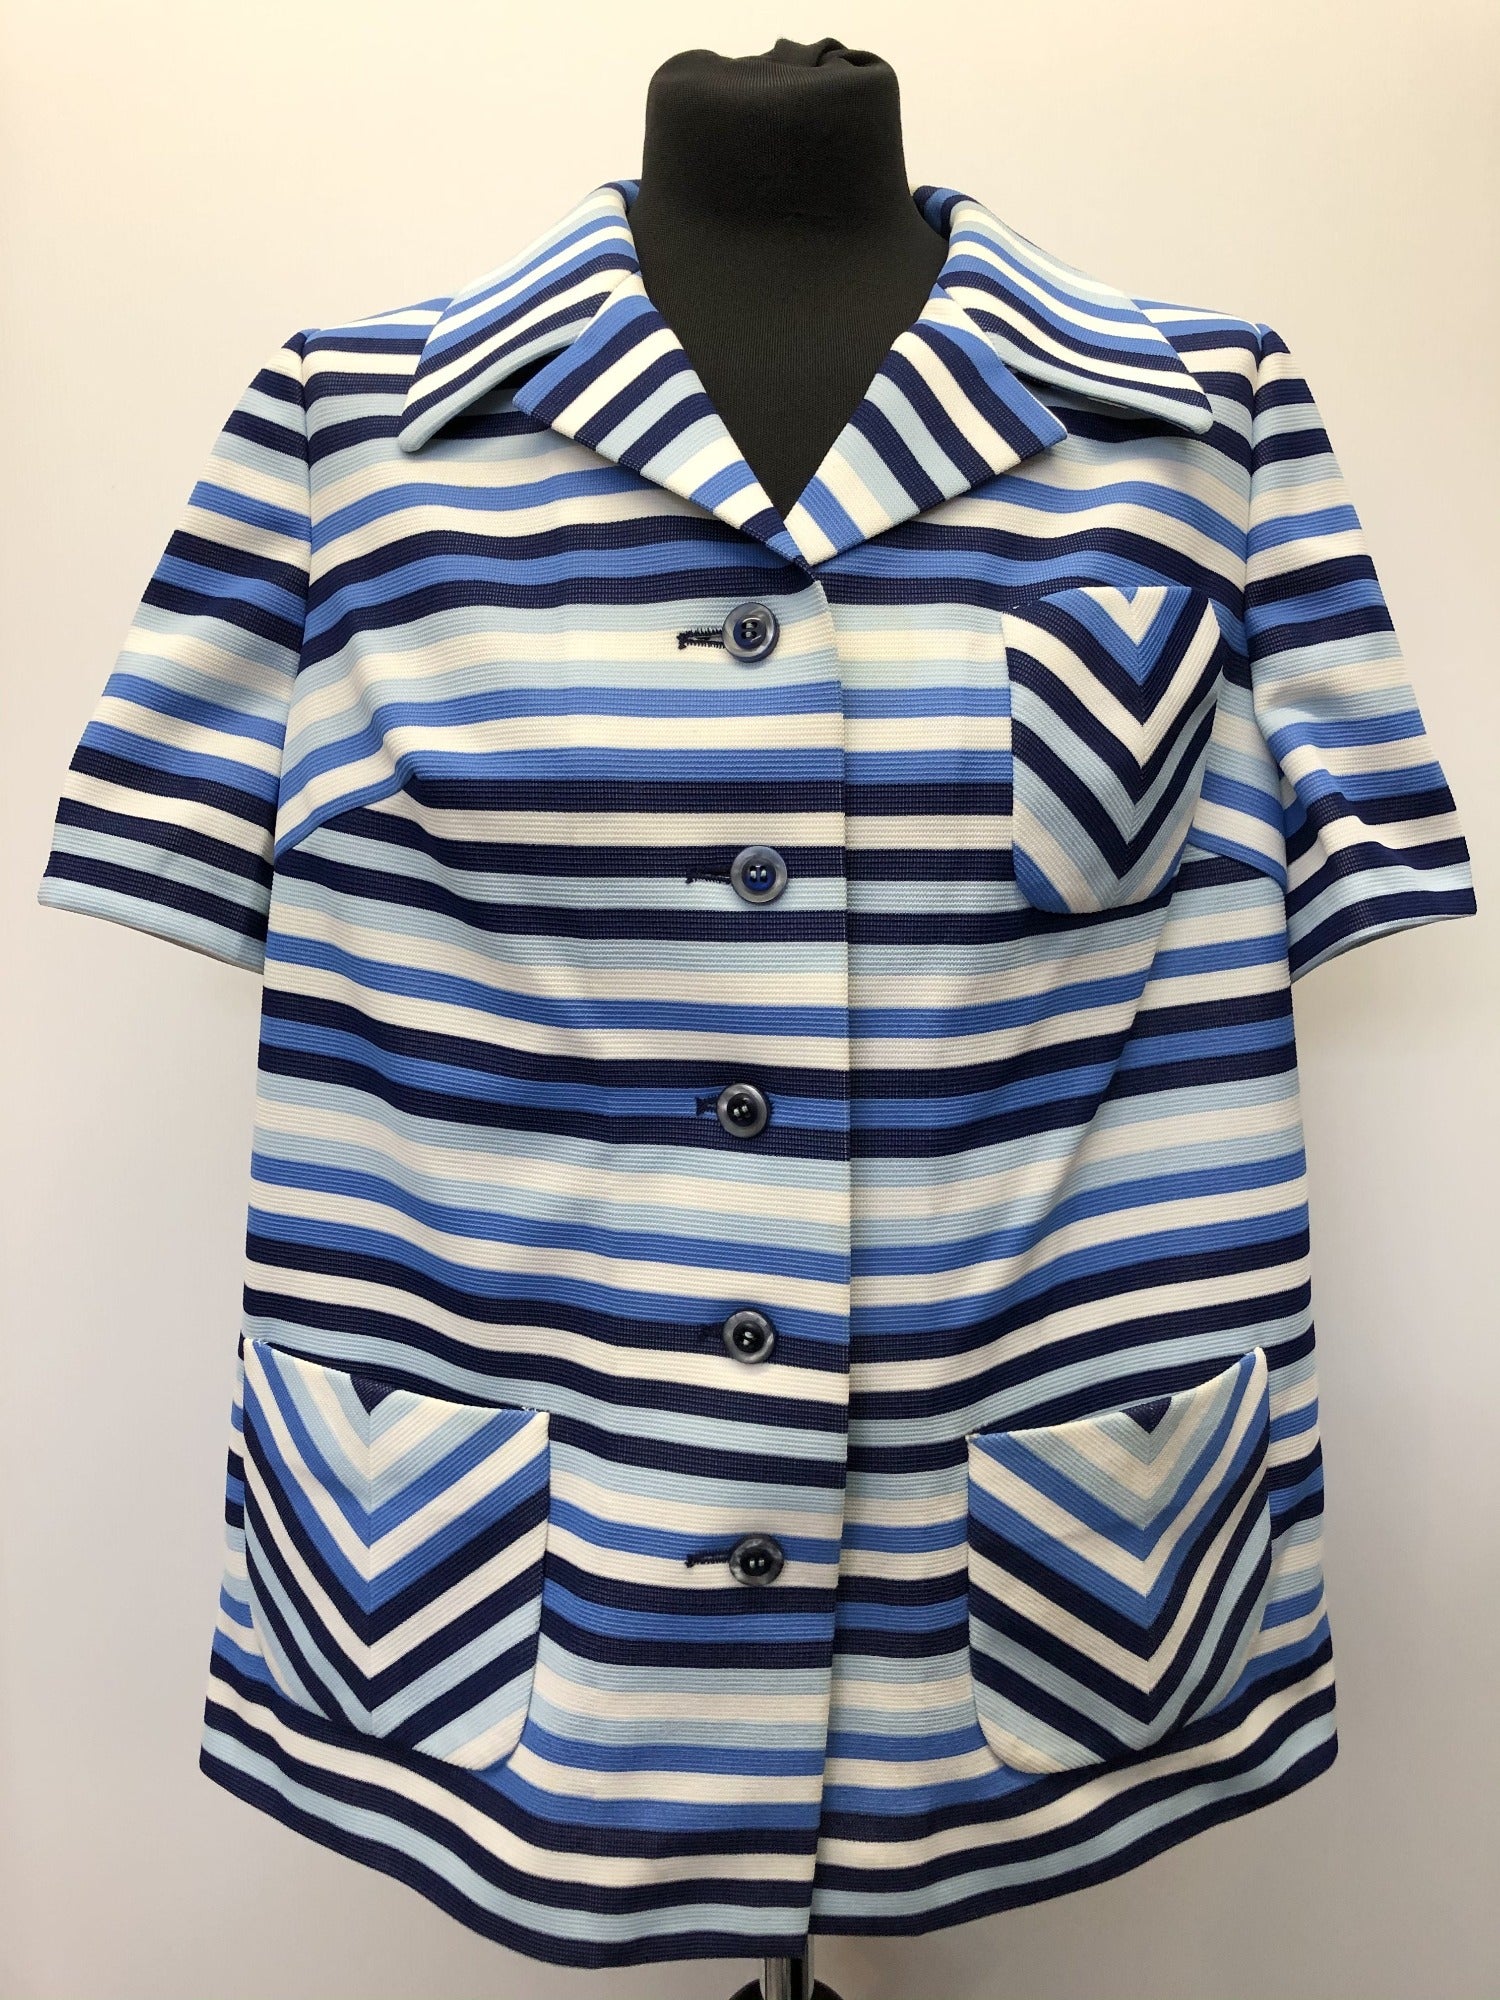 Womens 1960s / 1970s Eastex Short Sleeve Striped Collar Blouse / Top - Blue - Size 12 / 14 - Urban Village Vintage 